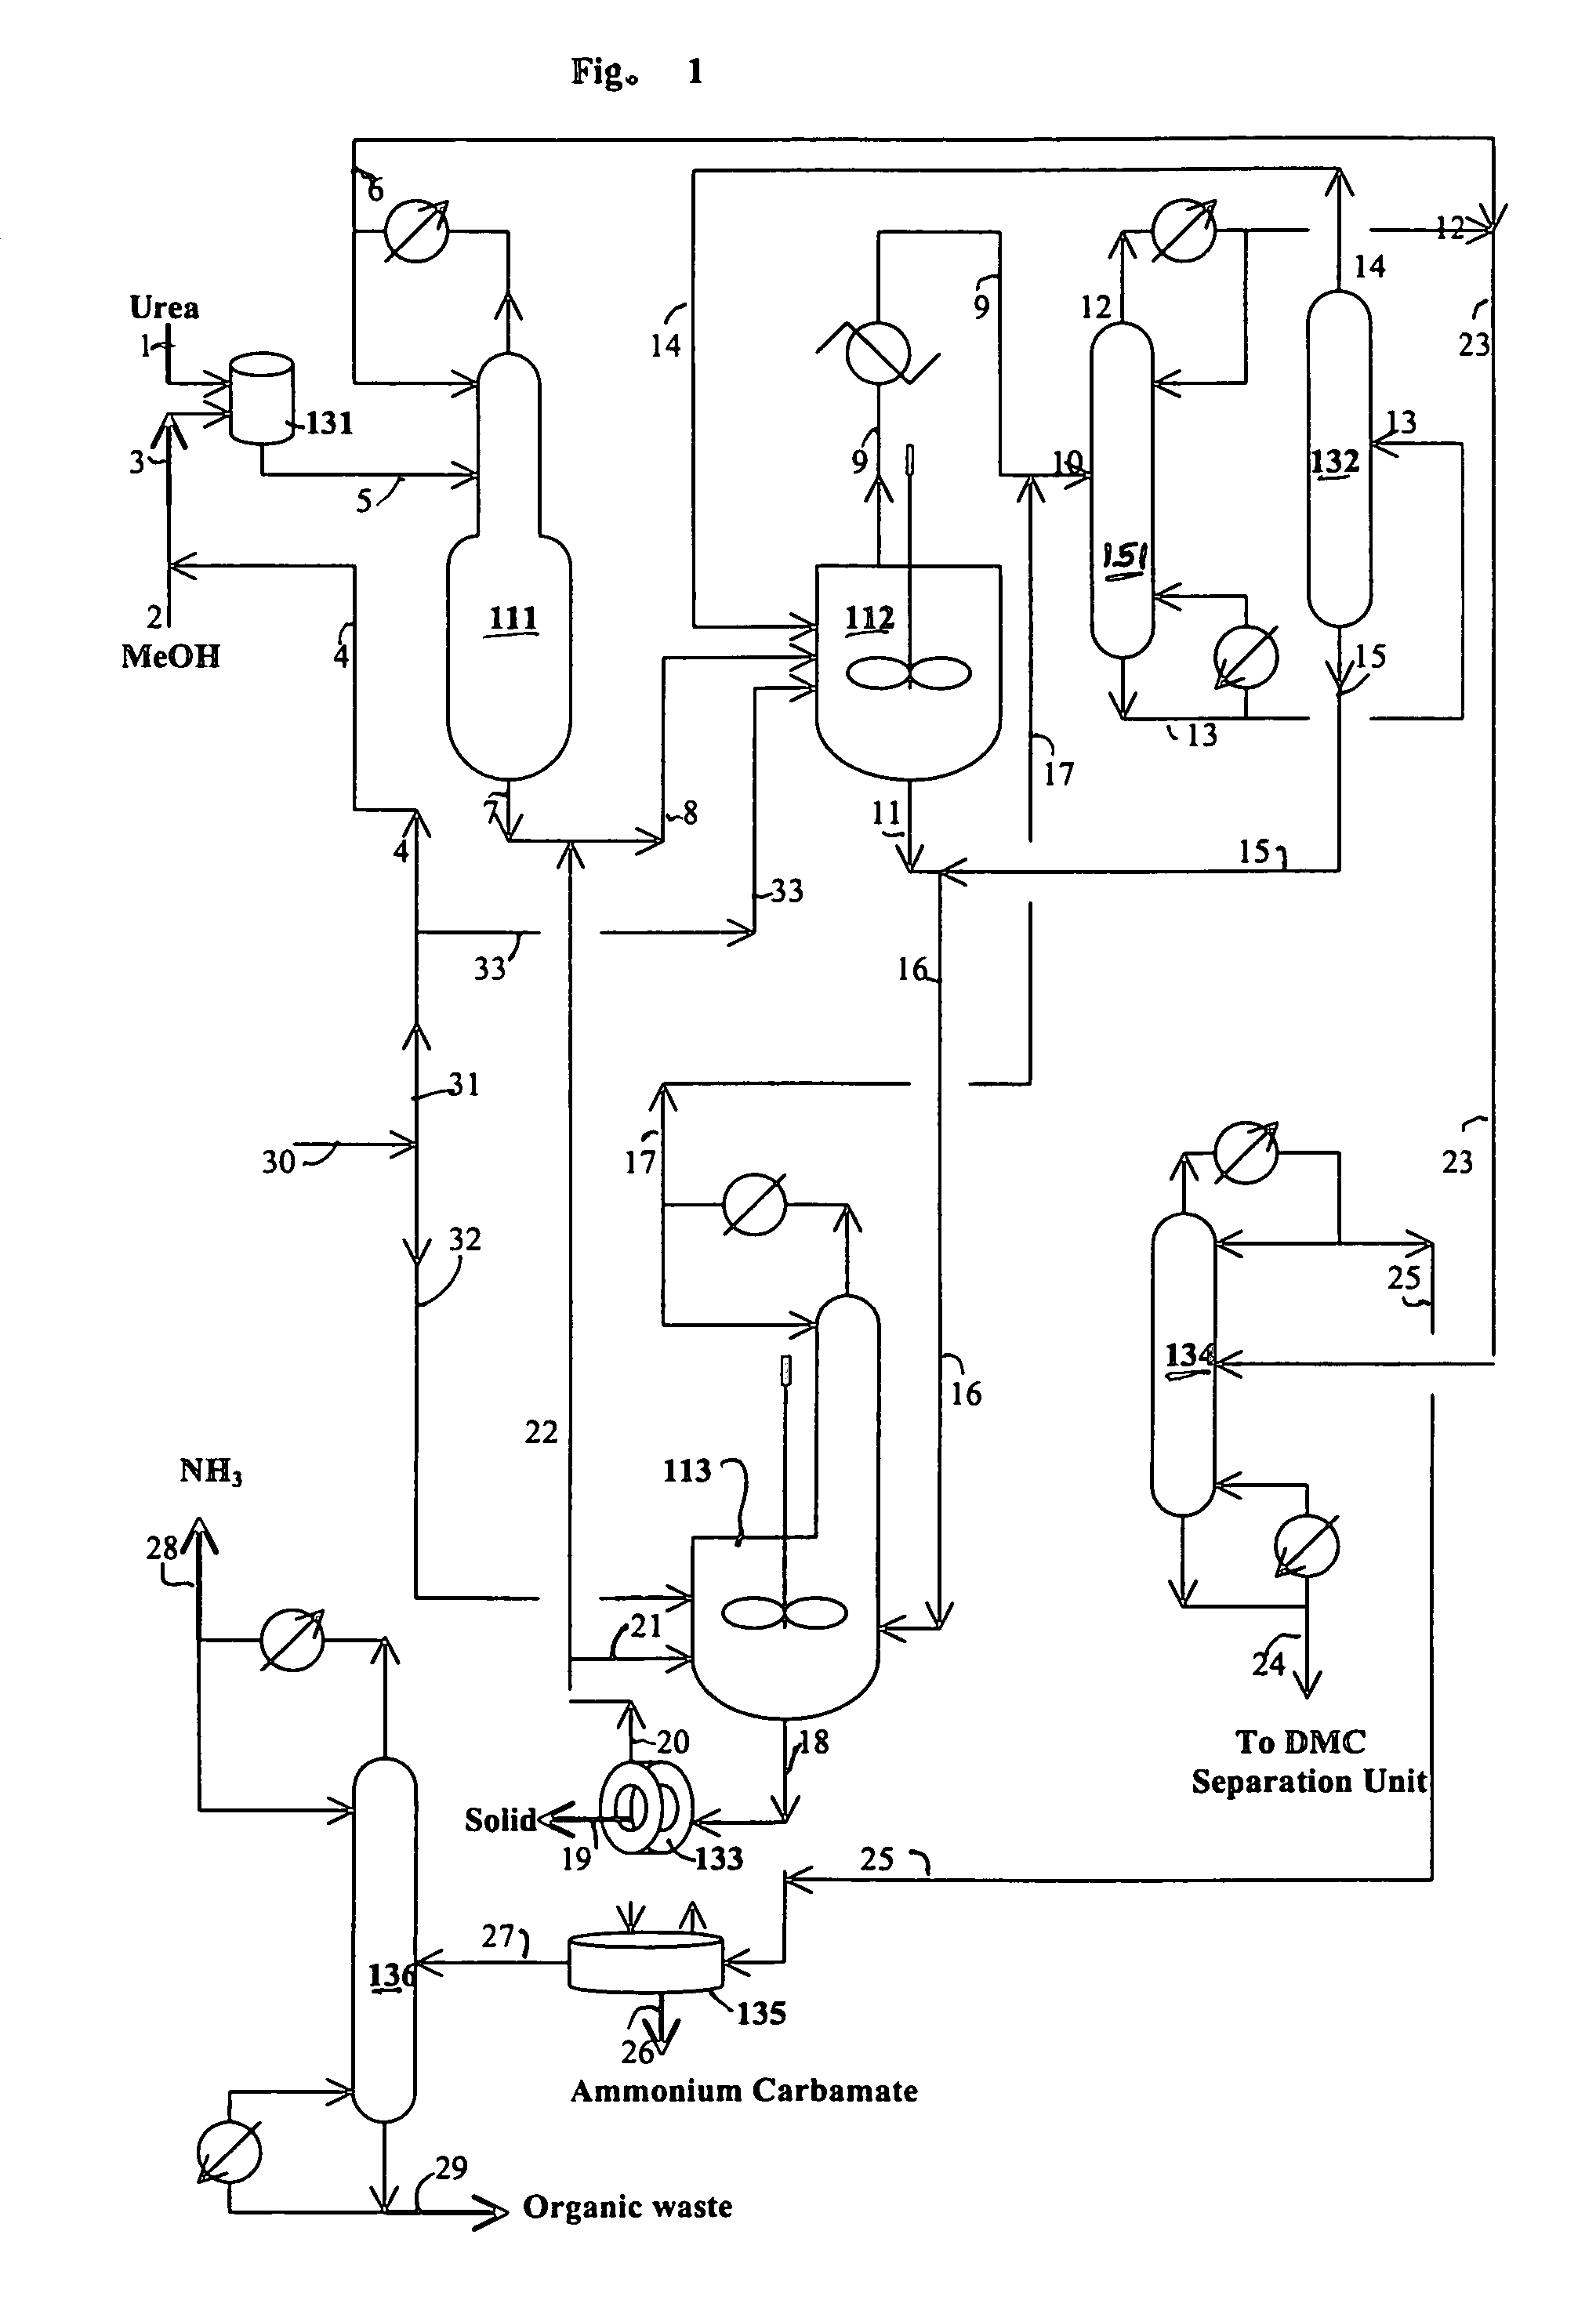 Process for making dialkyl carbonates